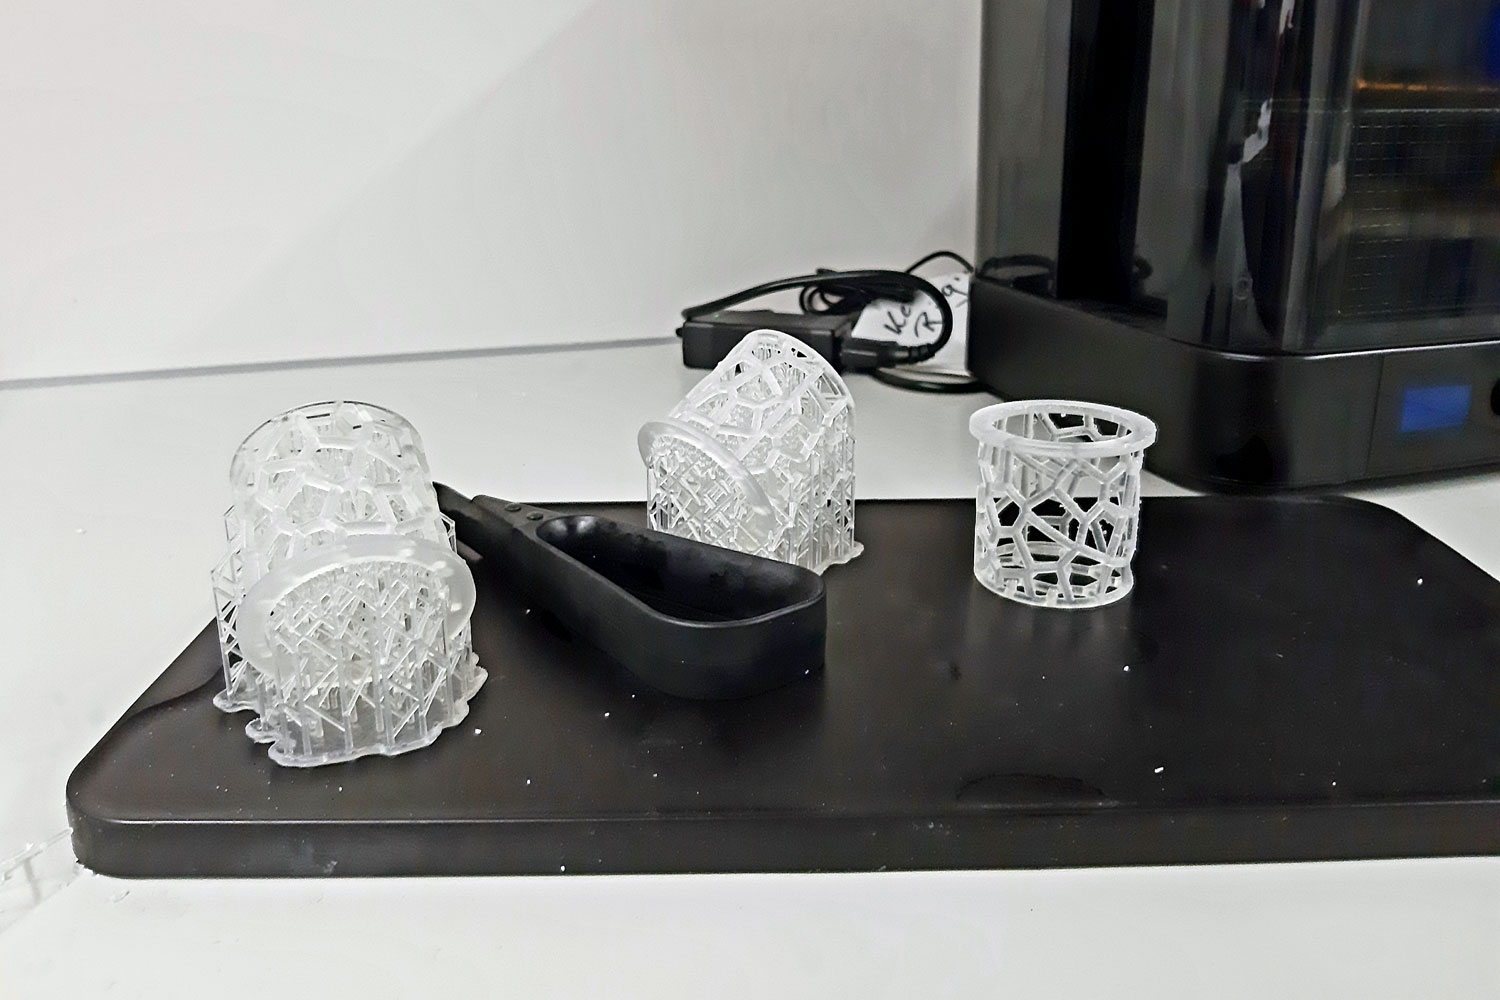 3D printed plant baskets for the window plot